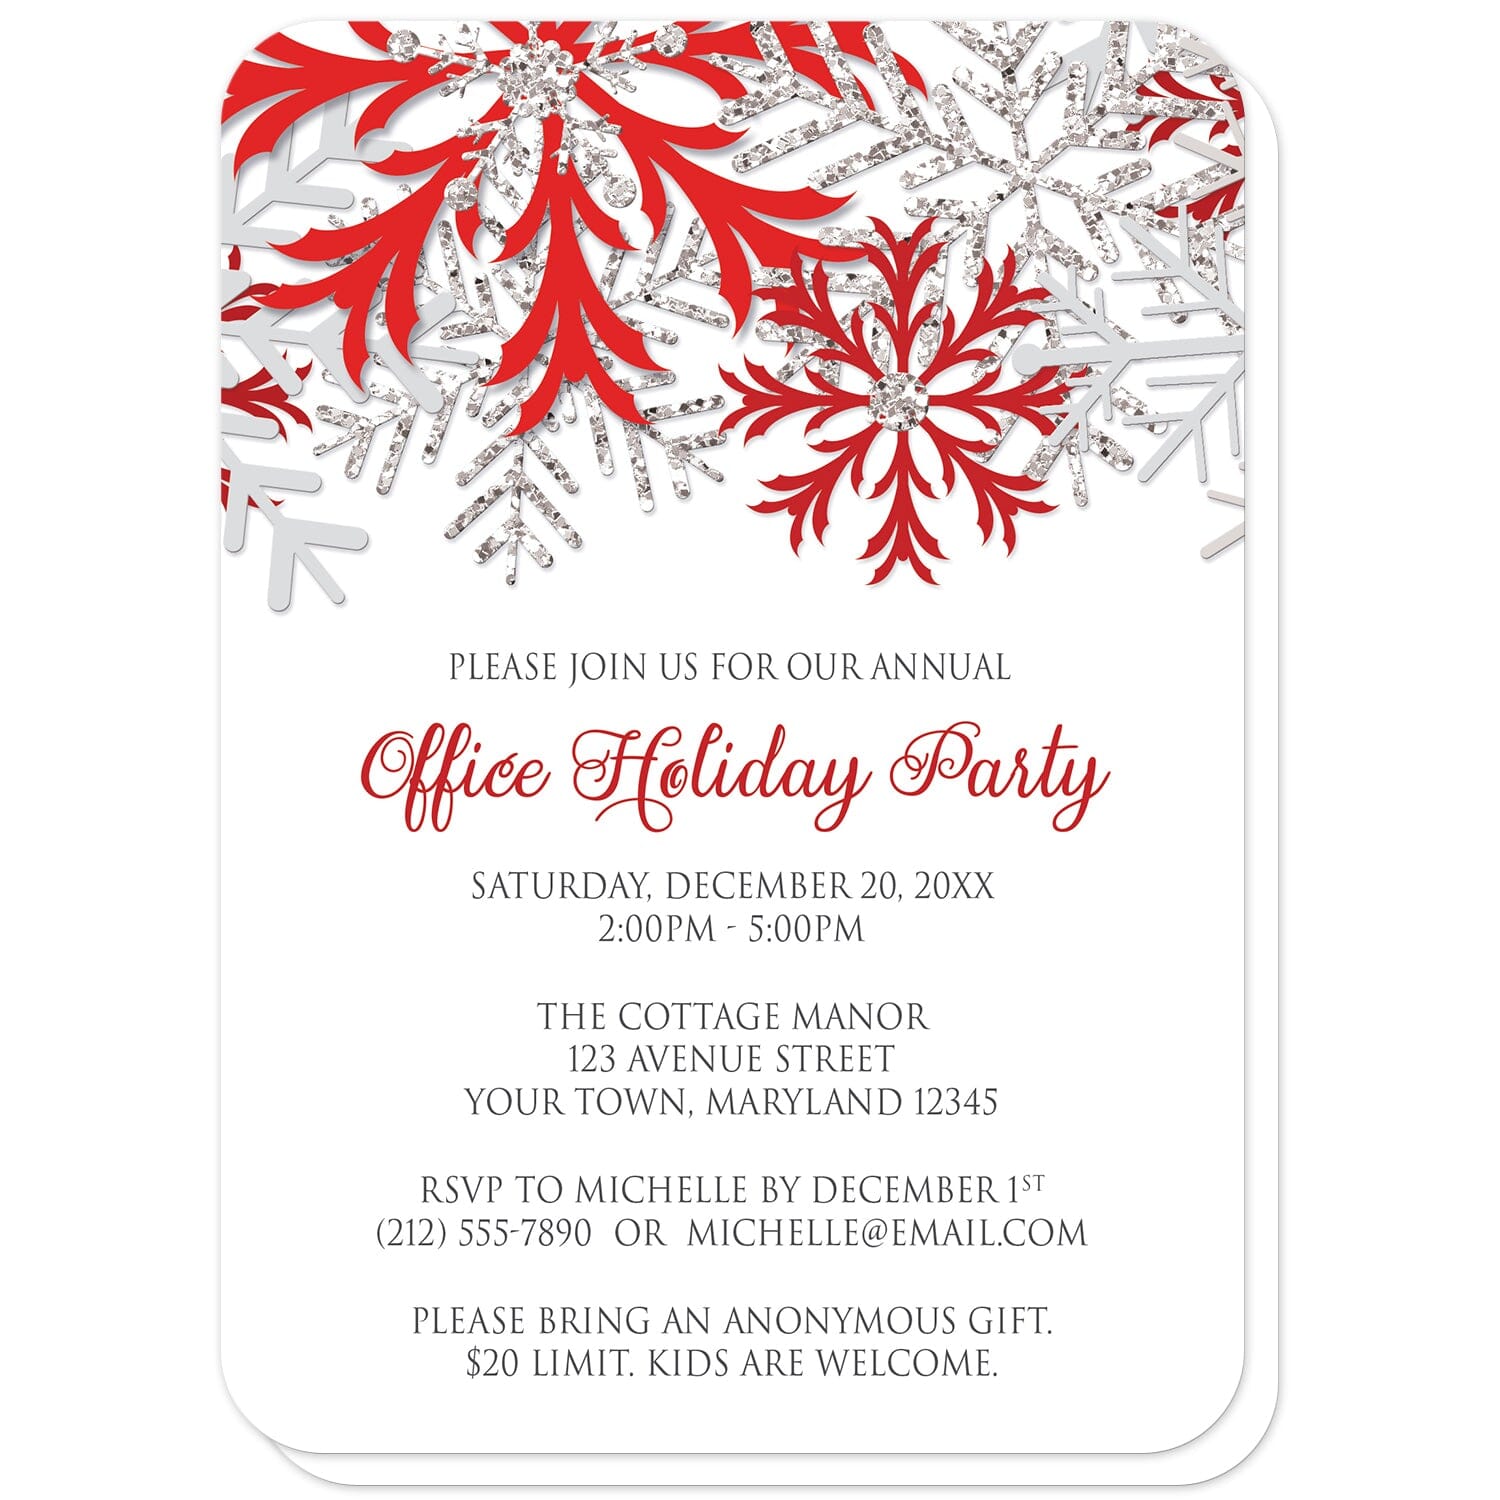 Winter Red Silver Snowflake Holiday Party Invitations (with rounded corners) at Artistically Invited. Winter red silver snowflake holiday party invitations with red, darker red, and silver-colored glitter-illustrated snowflakes over a white background. Your personalized party details for your home or office party are custom printed in gray and red. The occasion title is printed in a whimsical red script font while your remaining details are printed in an all-capital letters gray serif font.